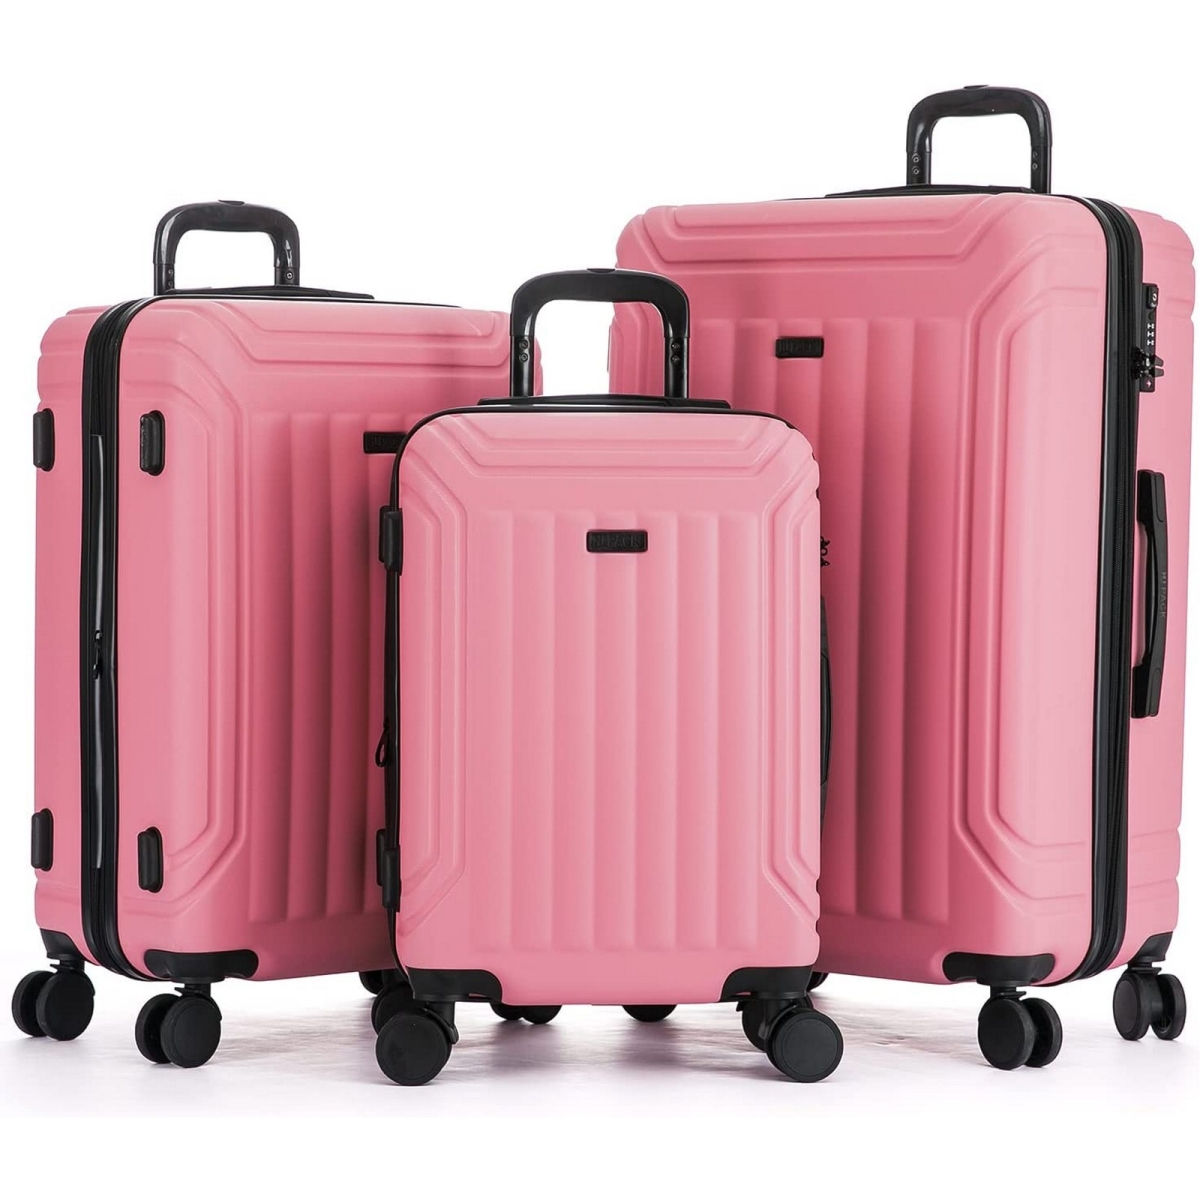 Picture of Hipack 25HP2107-ROSE Hipack Rover   Generation Hardside 3-Piece Luggage Set - Rose